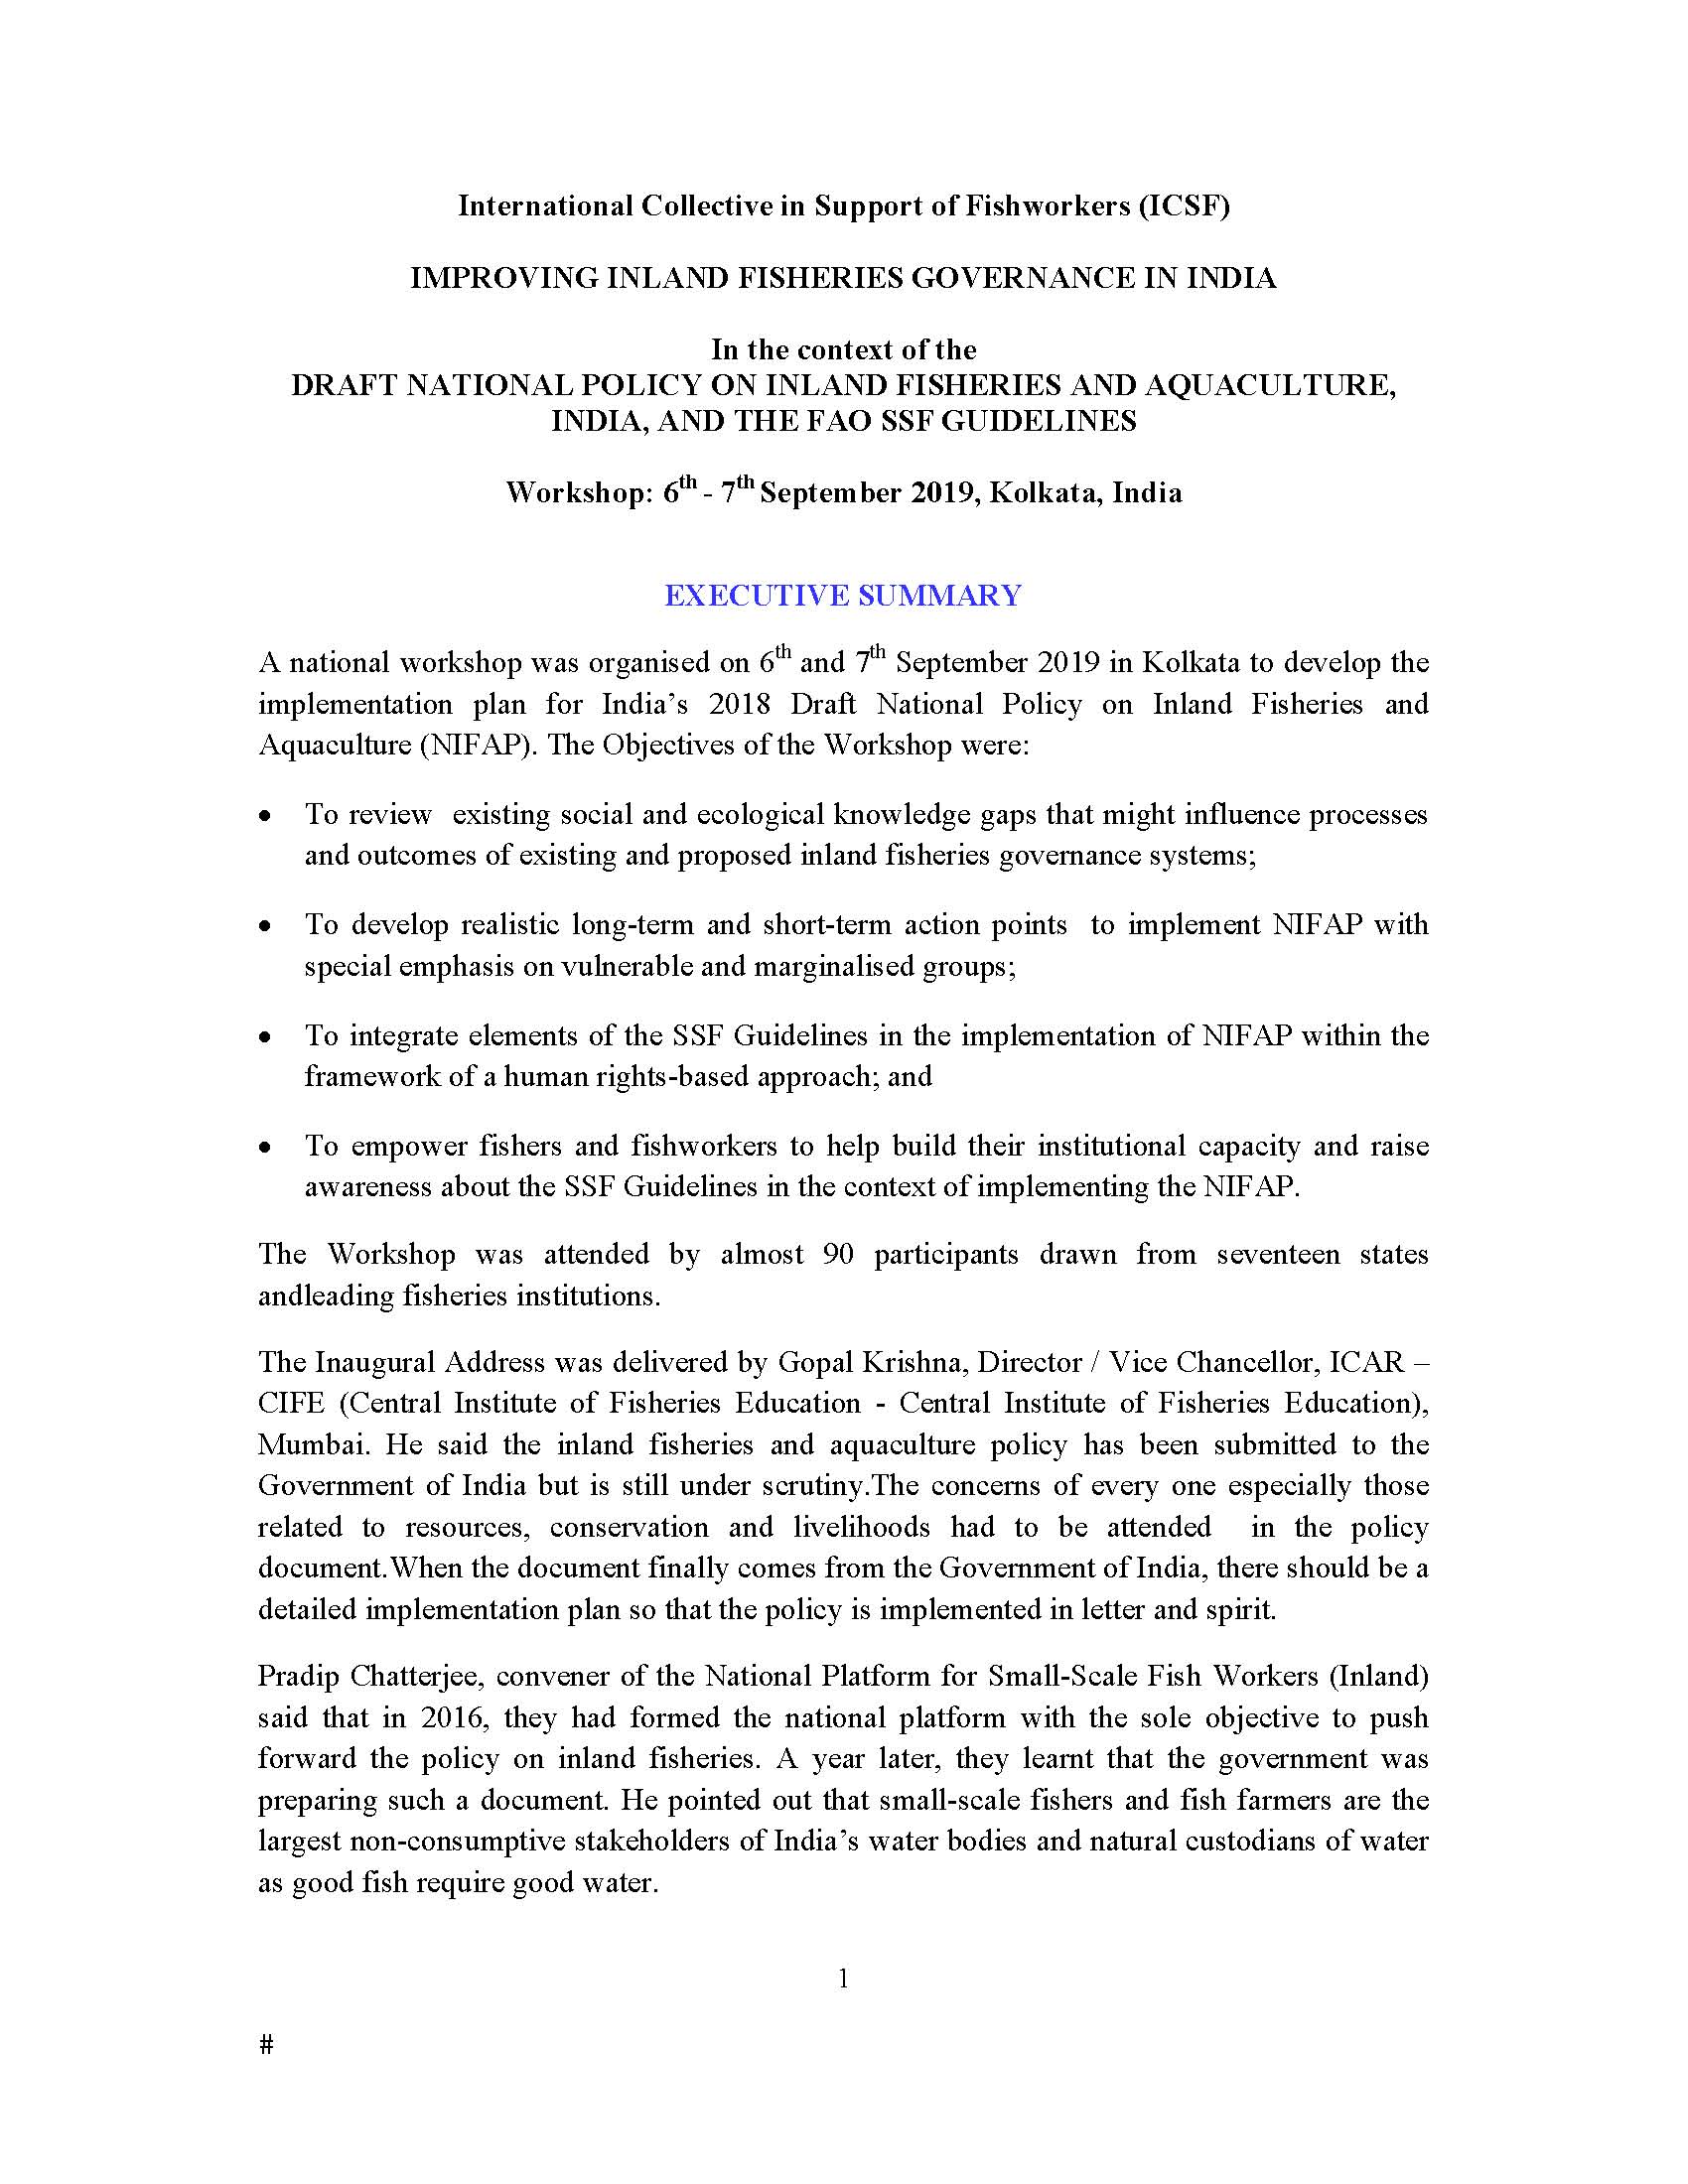 Improving Inland Fisheries Governance in India: In the Context of the Draft National Policy on Inland Fisheries and Aquaculture, India, and the FAO SSF Guidelines, 6th – 7th September 2019, Kolkata, India